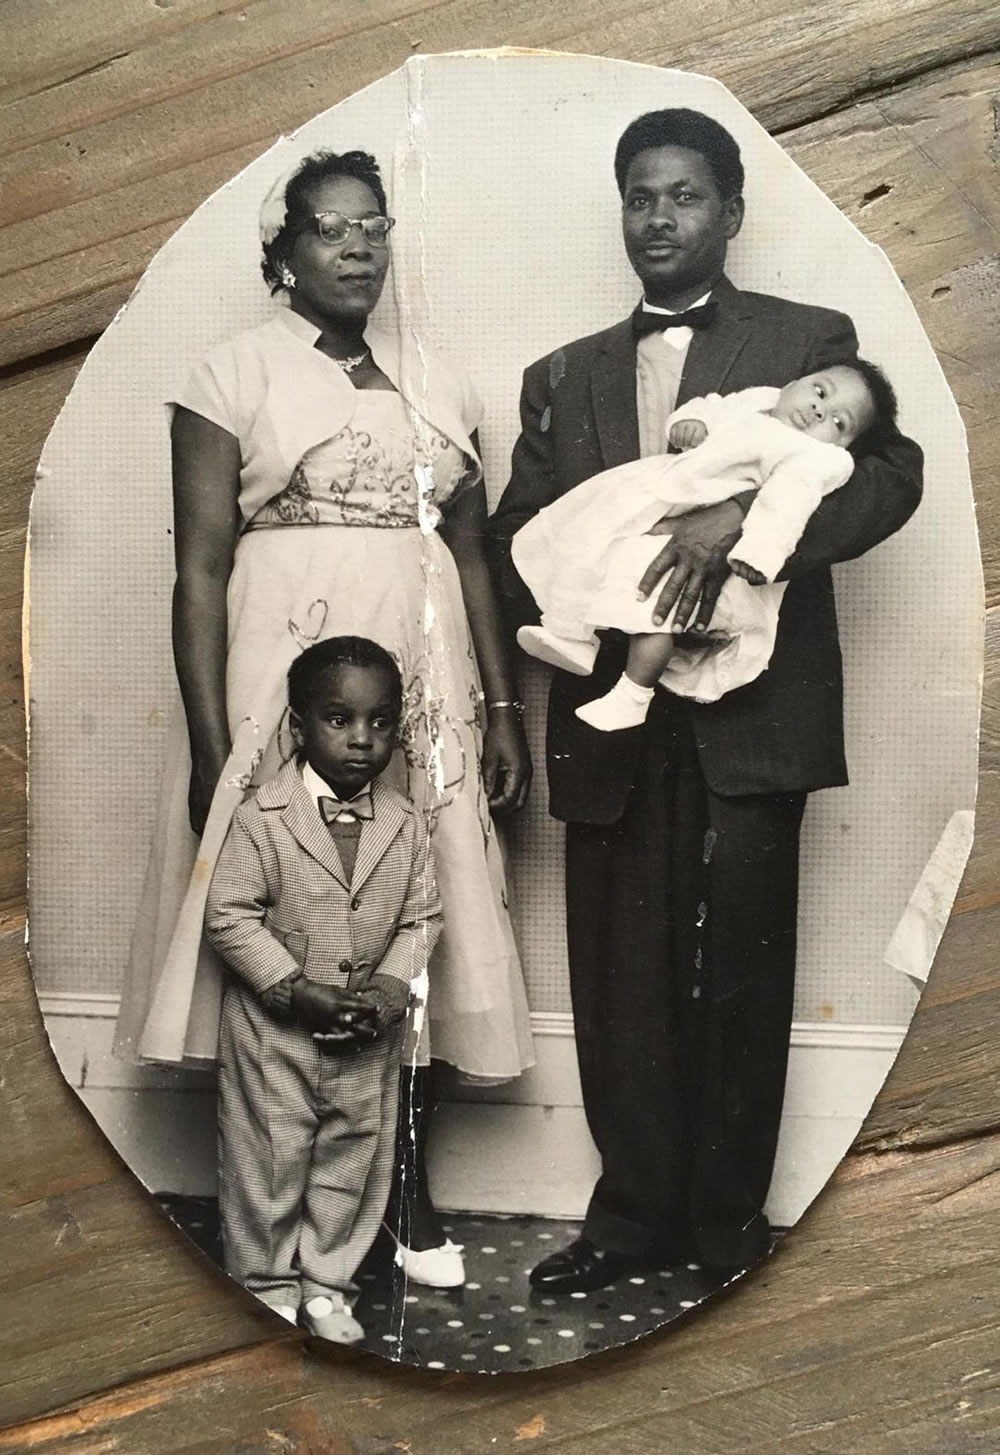 Clockwise from left) Ruby Humes (grandmother), Robert Humes (grandfather), Peter Humes (uncle) and Colin Humes (father) - c. 1962